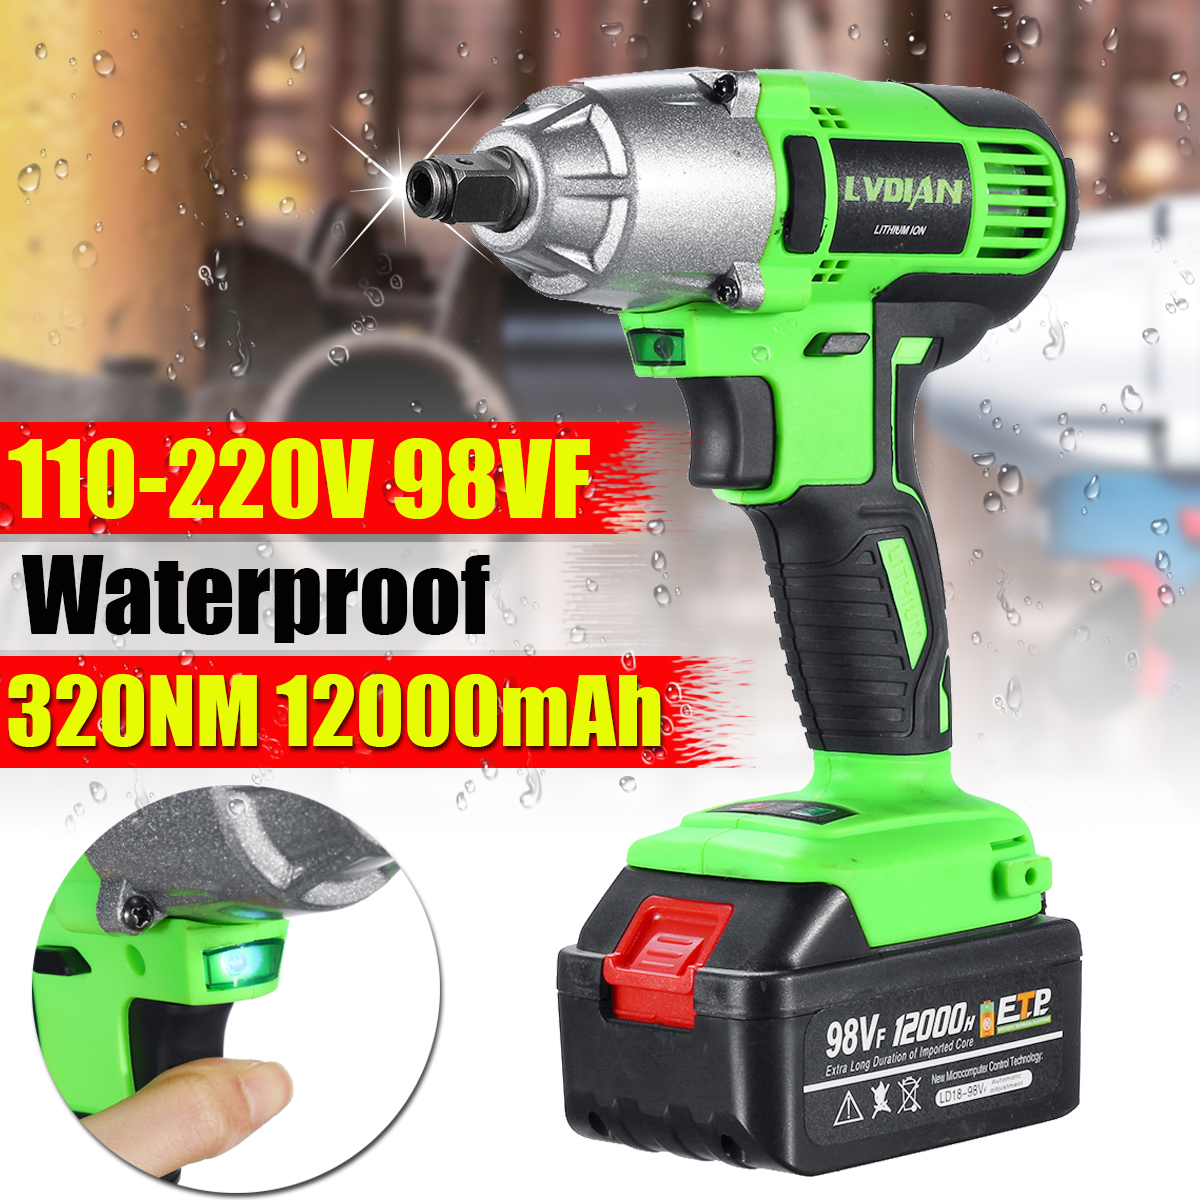 98VF-Brushless-Impact-Wrench-320Nm-Electric-Cordless-Rechargeable-Driver-Woodworking-Tools-1901190-1